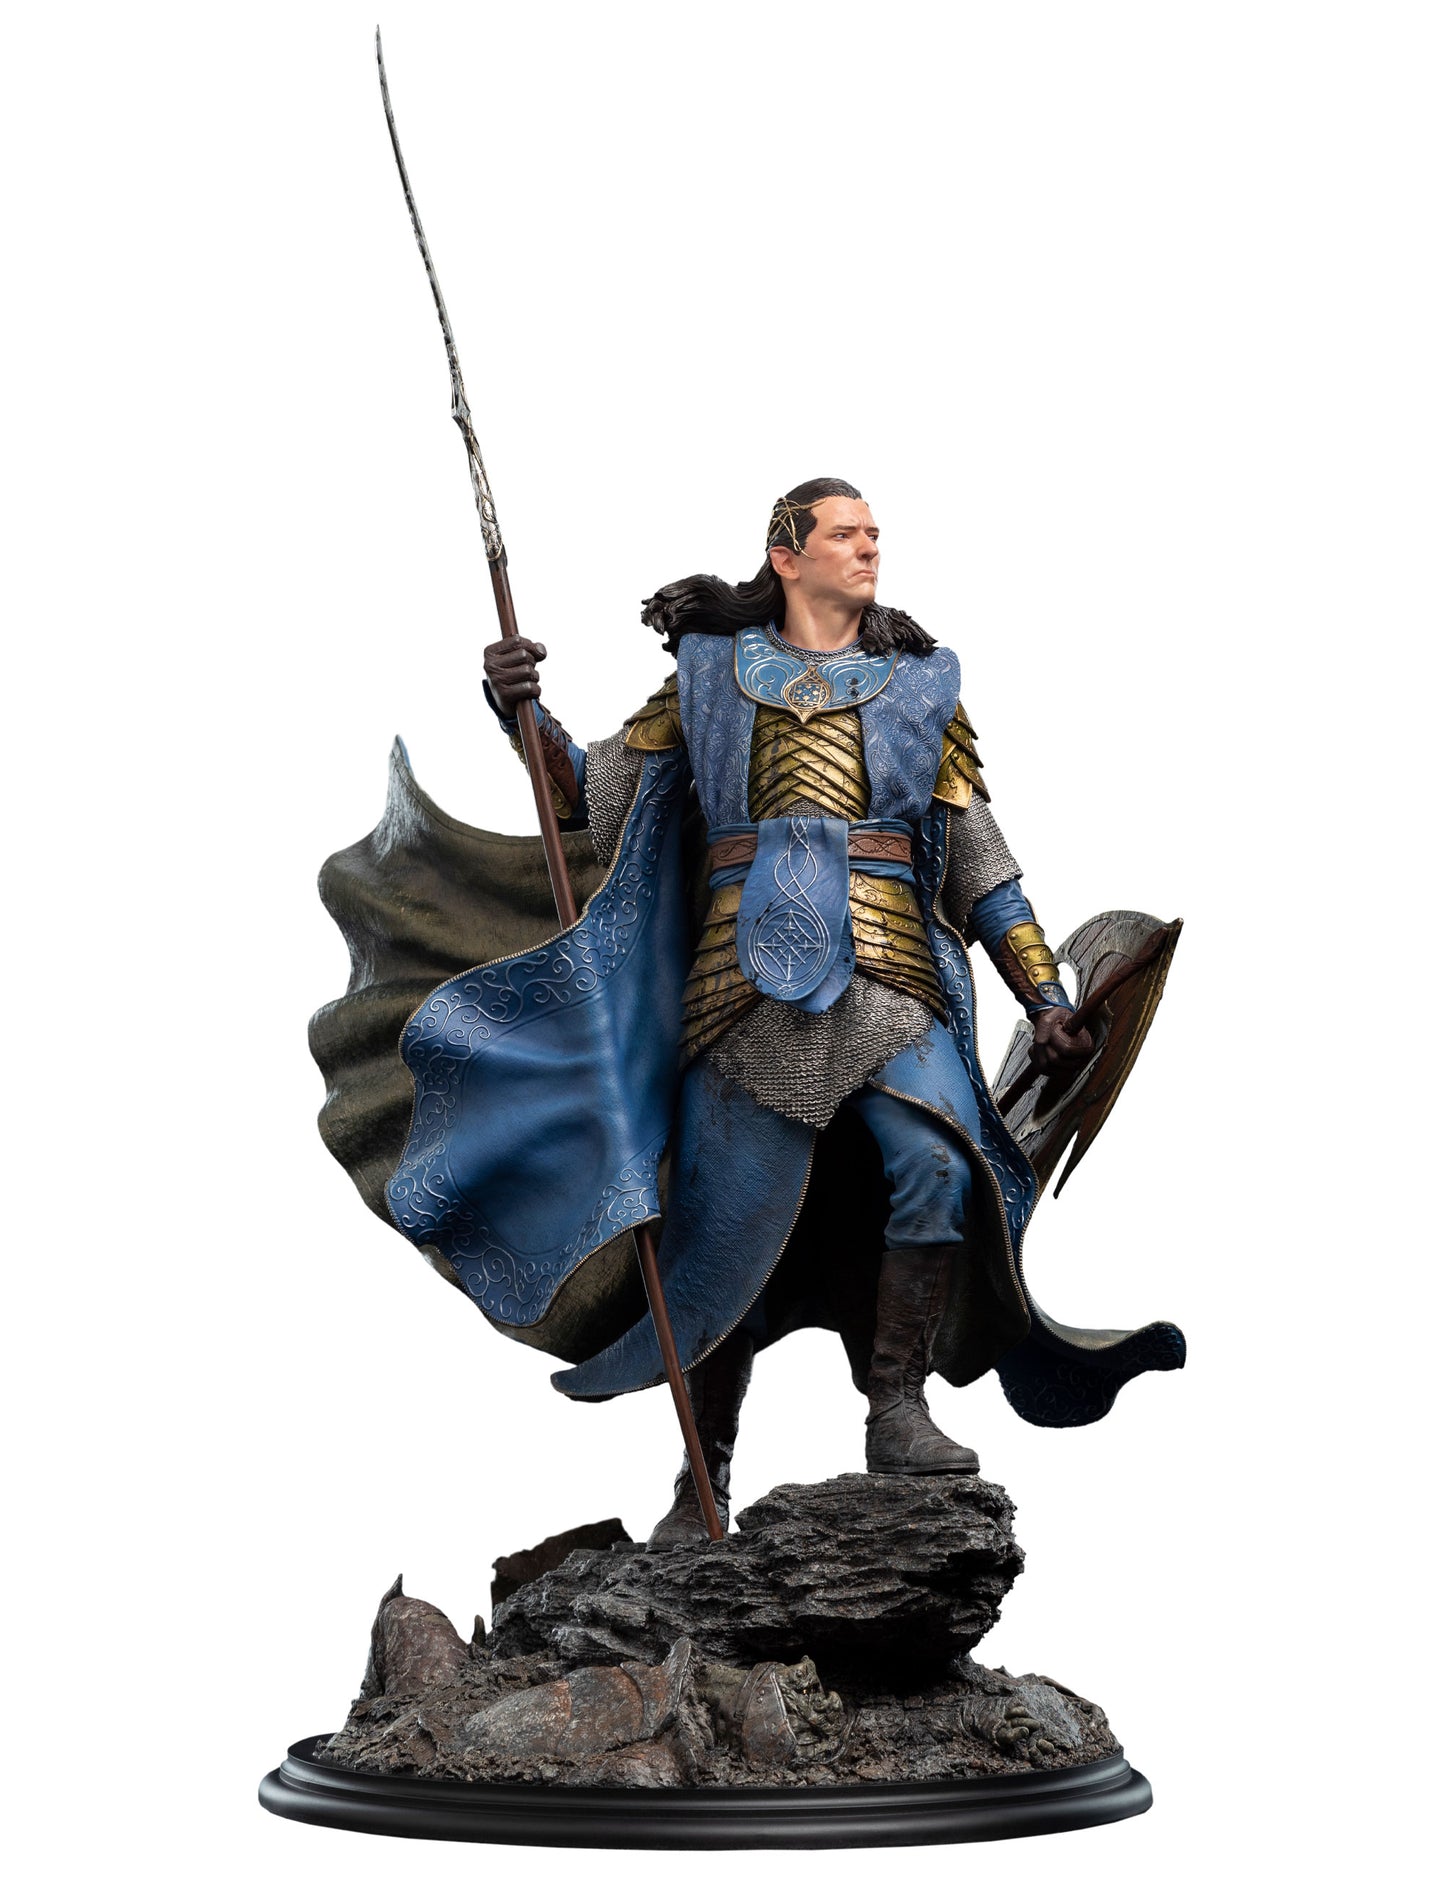  Gil-galad (Lord of the Rings) 1:6 Scale 20th Anniversary Limited Edition Statue by Weta Workshop